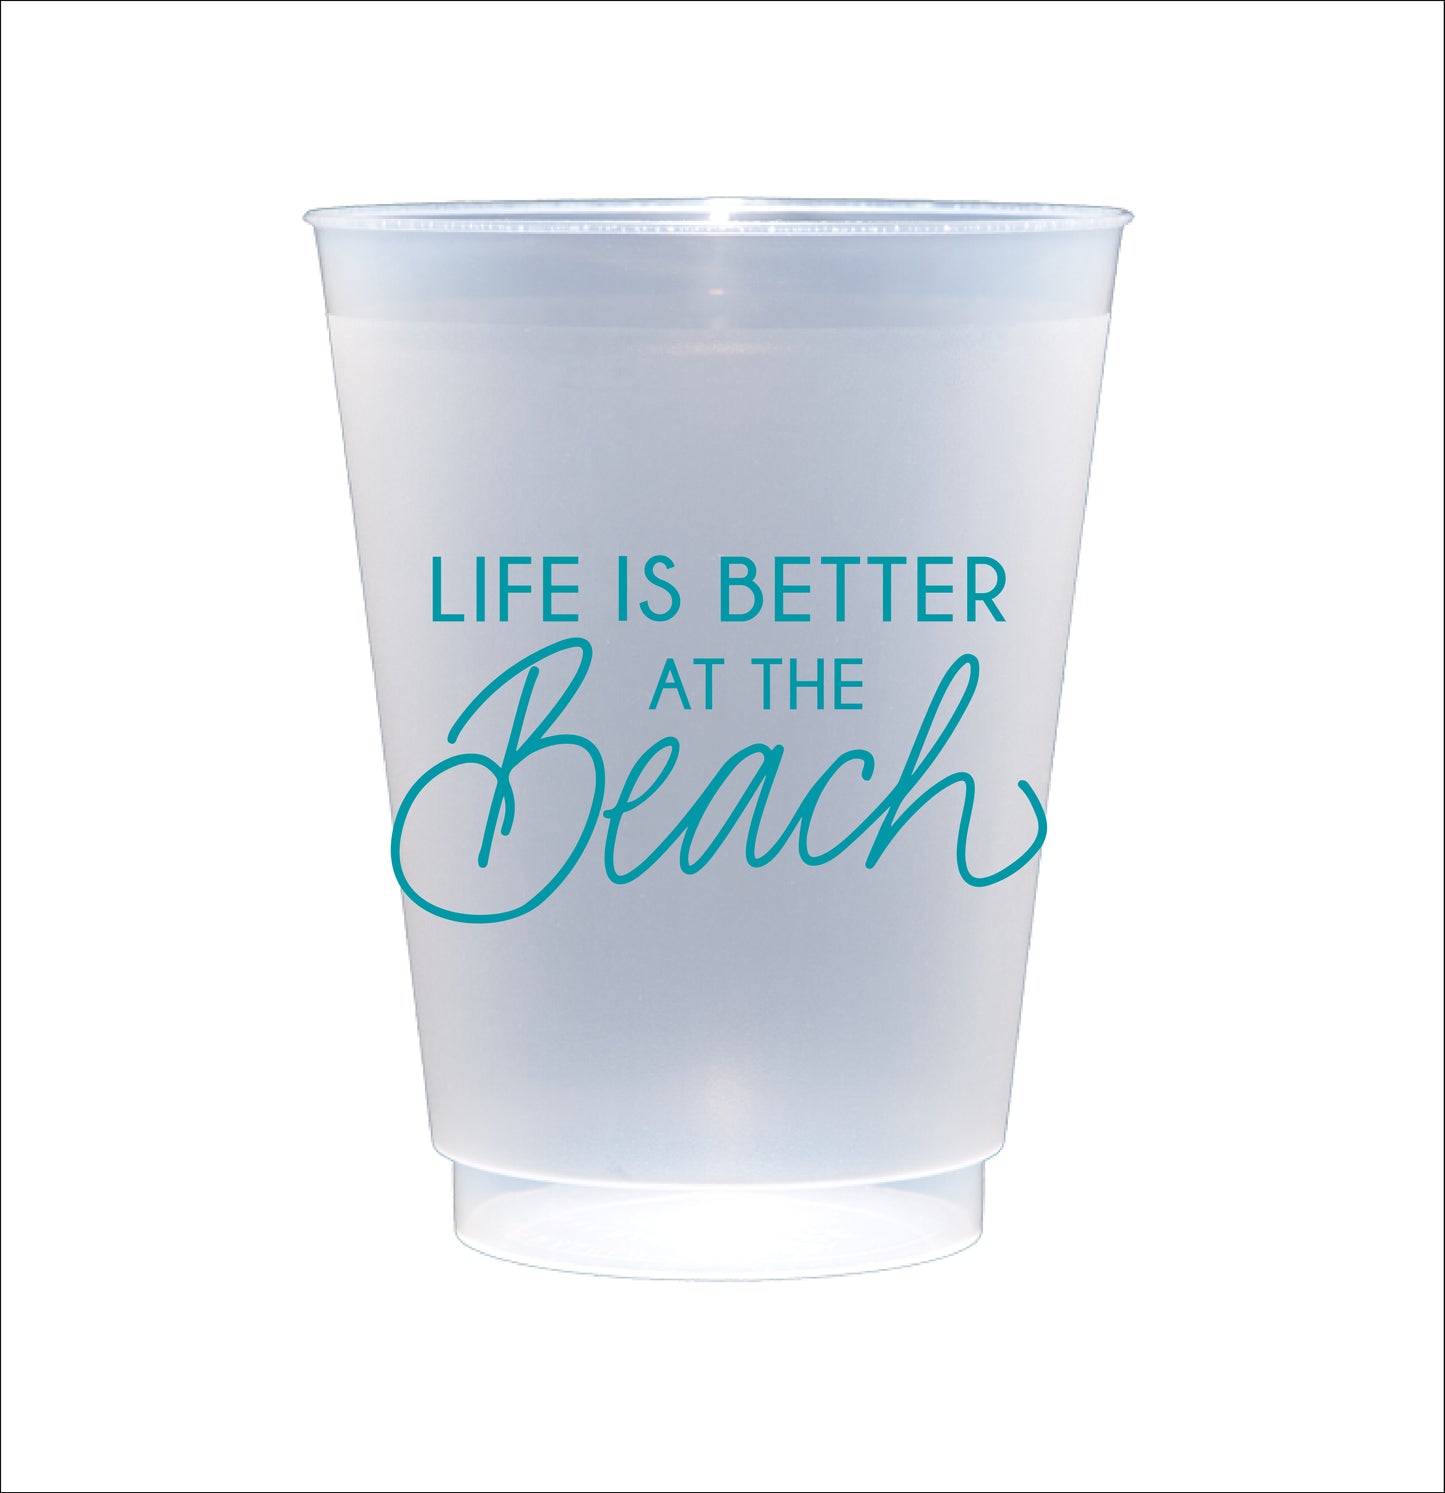 These cups are perfect for your next beach vacation or weekend. Best of all, you can use these time and time again - they're dishwasher safe!  These fun and reusable cups come in a cellophane sleeve with a black and white striped ribbon tied in a bow at the top. 